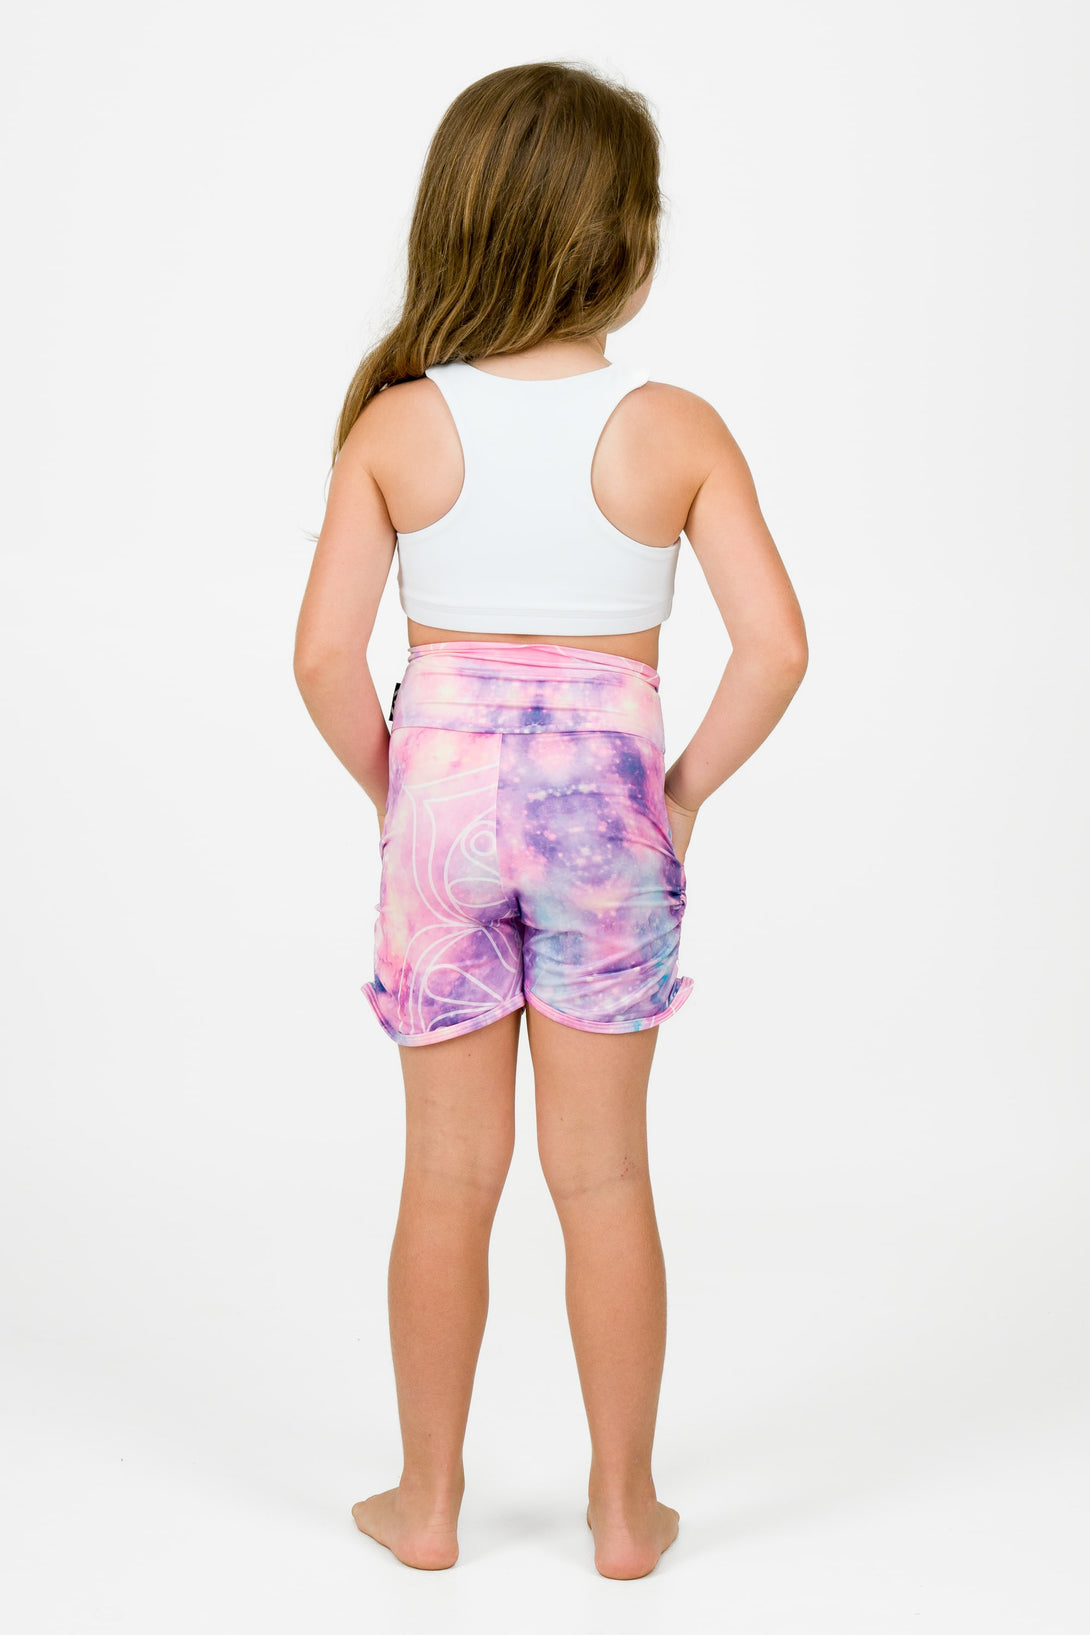 Young girl wearing kids jogger shorts in a bright playful purple star print 